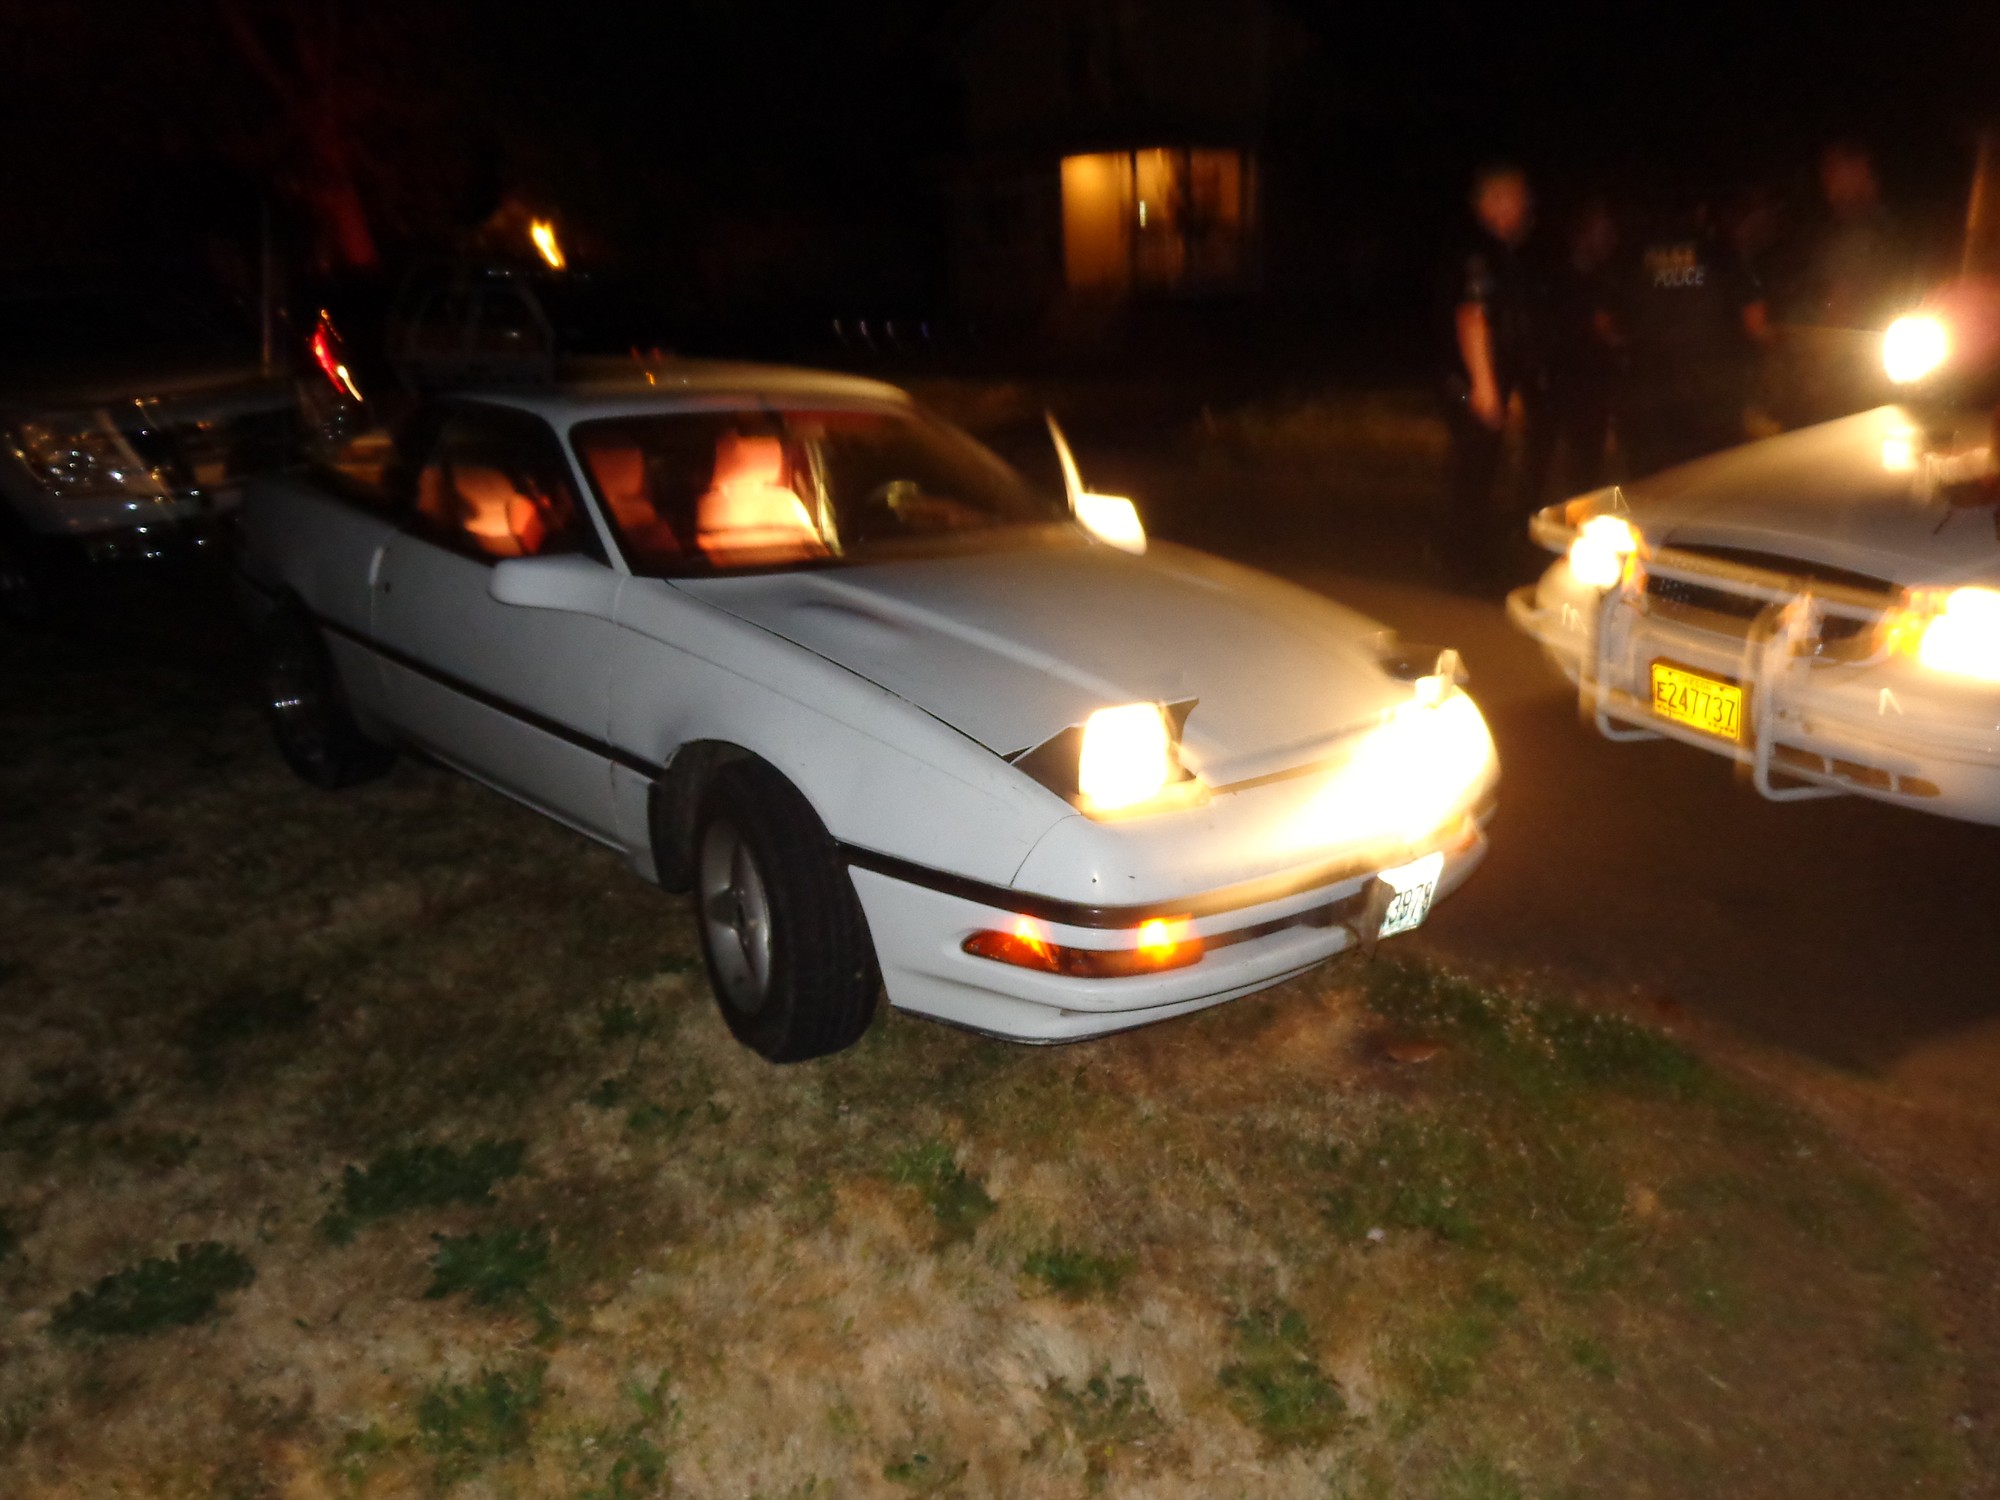 A teenage driver was sent to the hospital for minor injuries after police say the driver rammed a police car during a pursuit in Milwaukie, Ore. Wednesday evening.